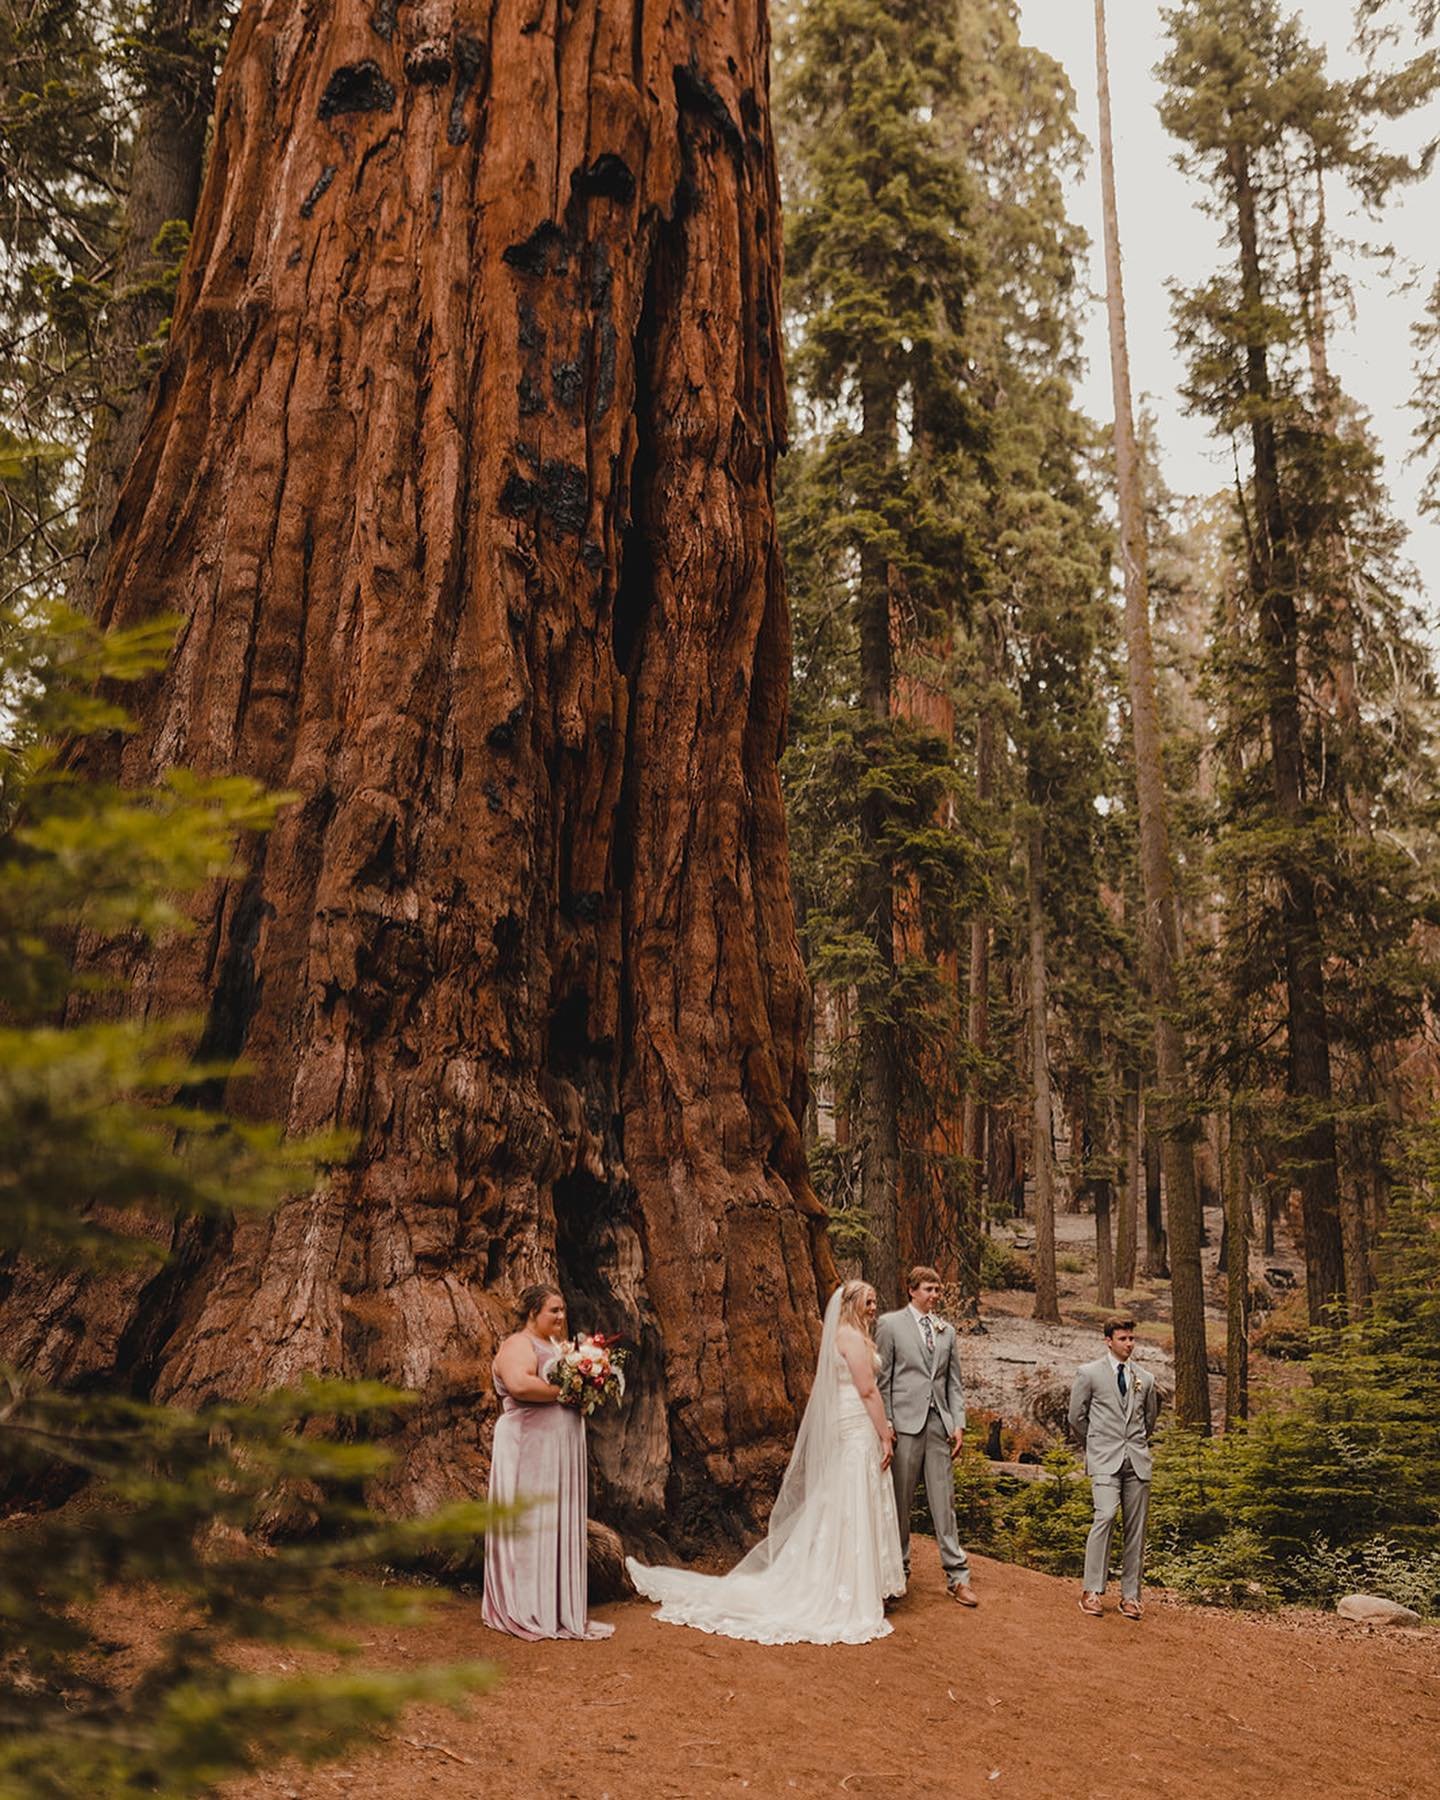 Hannah &amp; Zac, under the great giants🌲